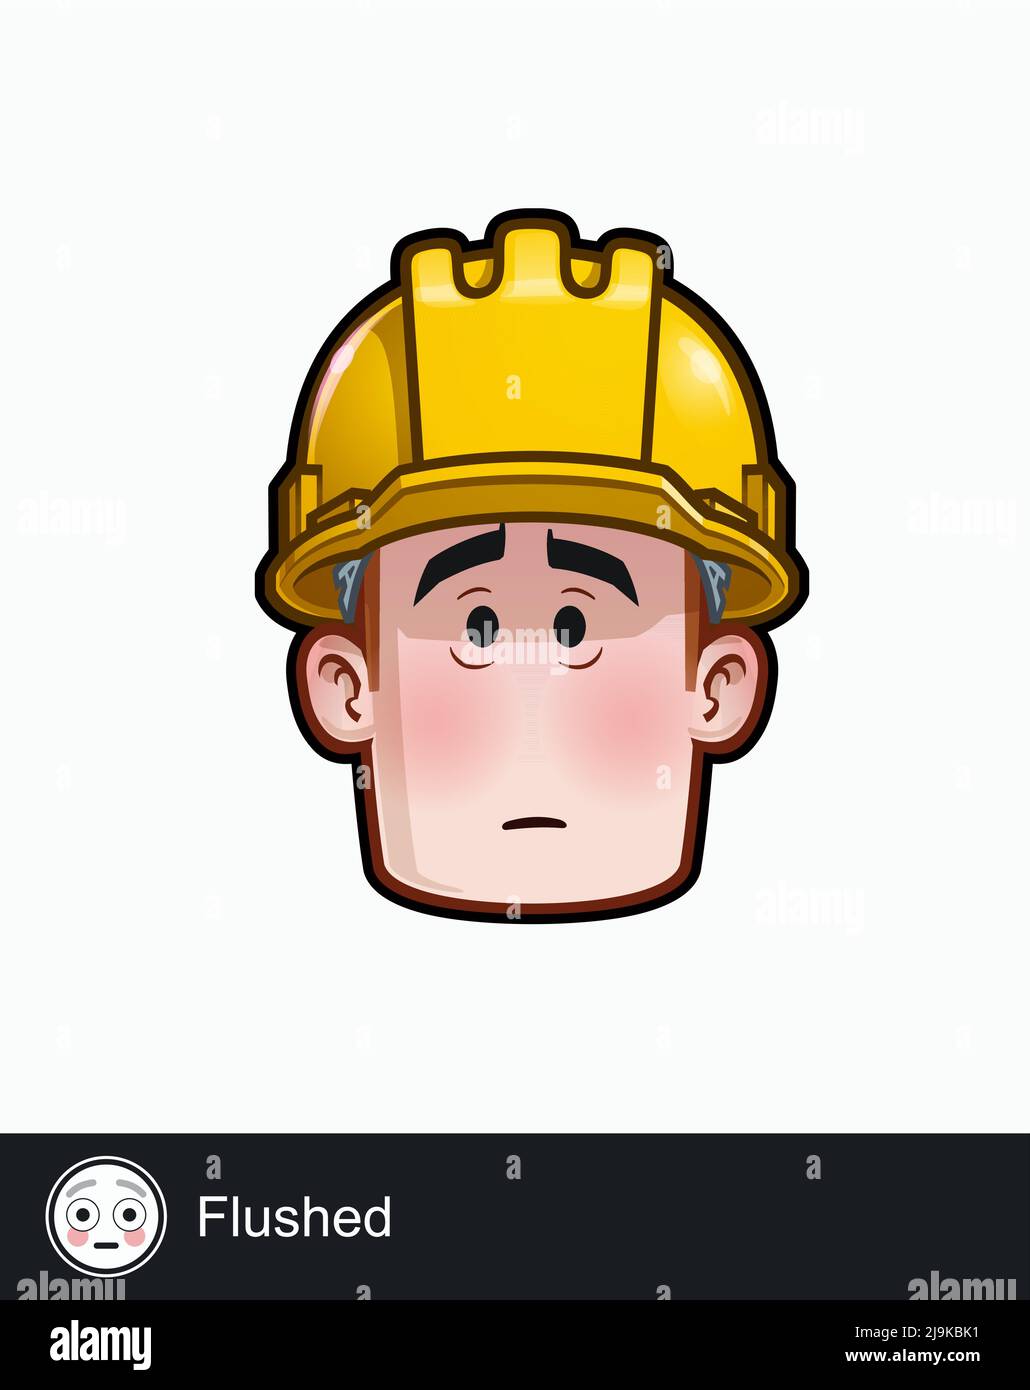 Icon of a construction worker face with Flushed emotional expression. All elements neatly on well described layers and groups. Stock Vector